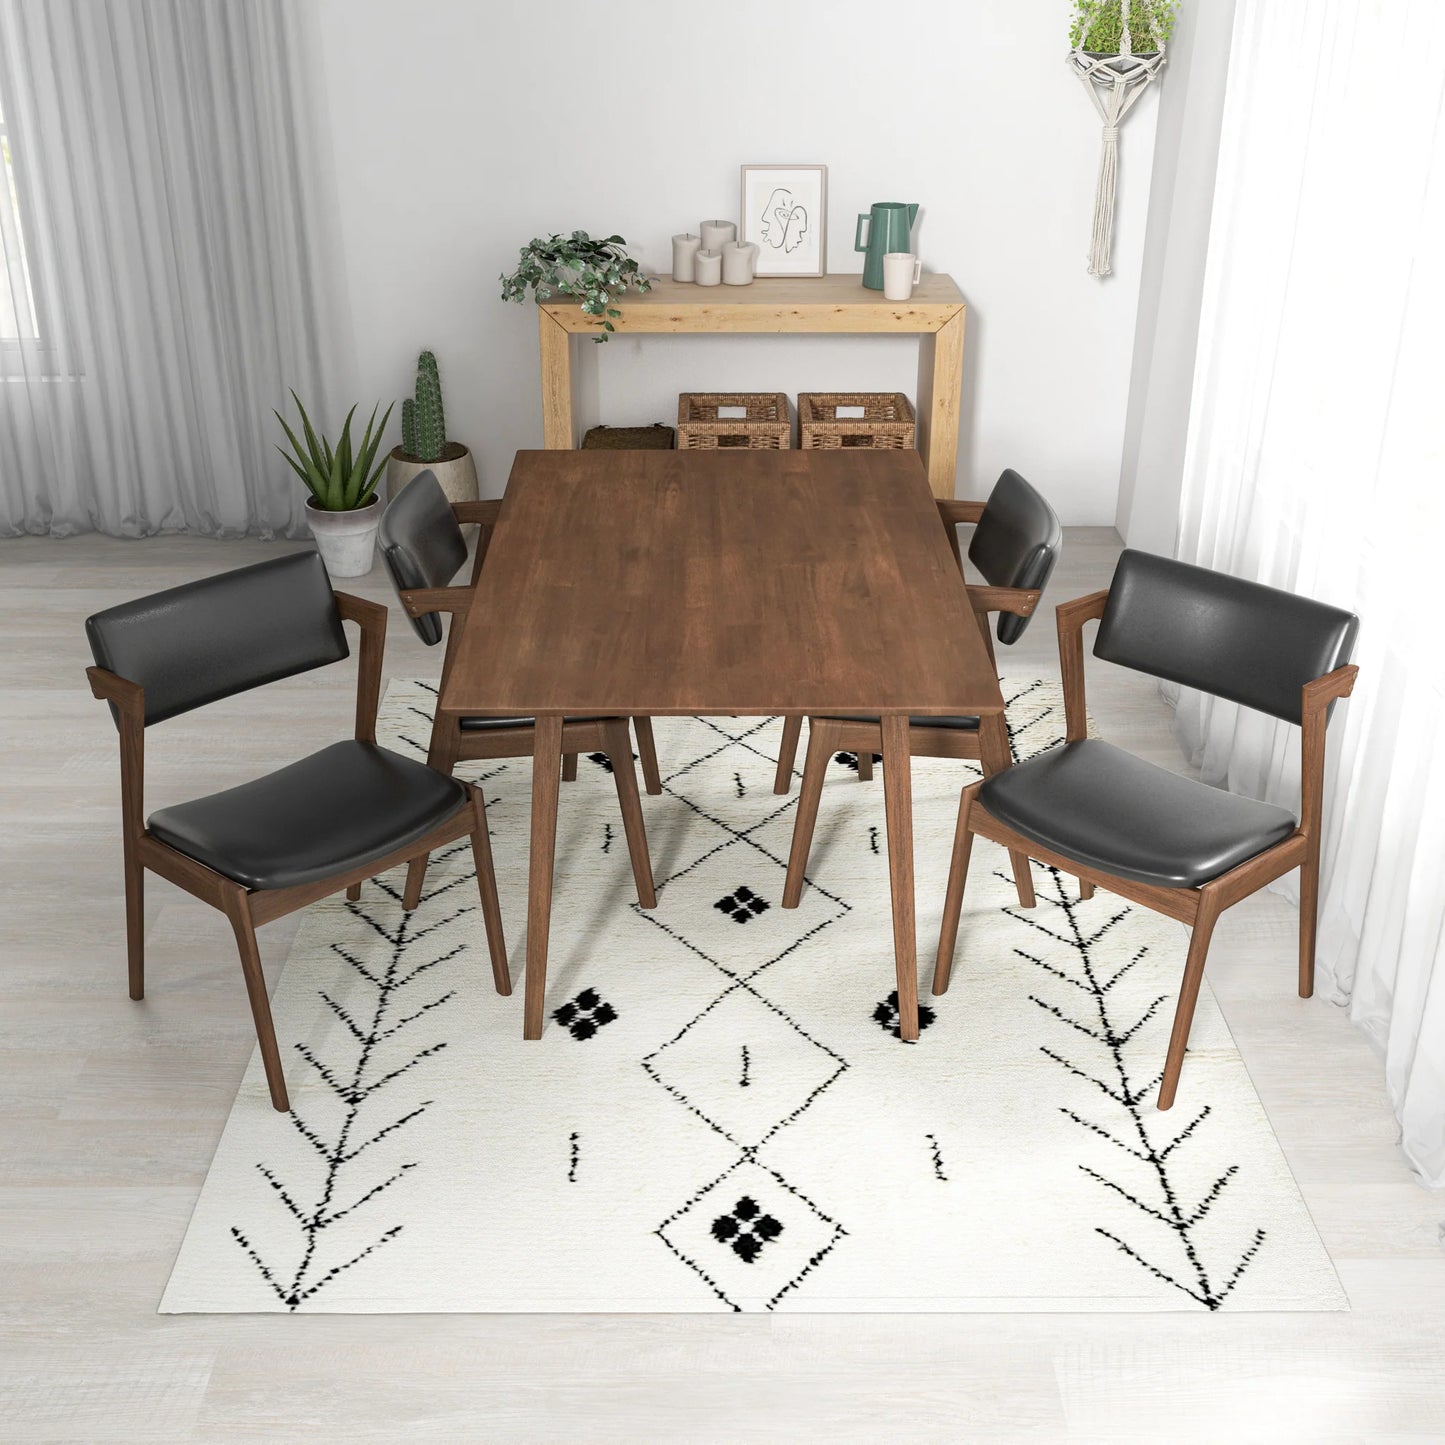 Adira (Small - Walnut) Dining Set with 4 Ricco (Black Leather) Dining Chairs